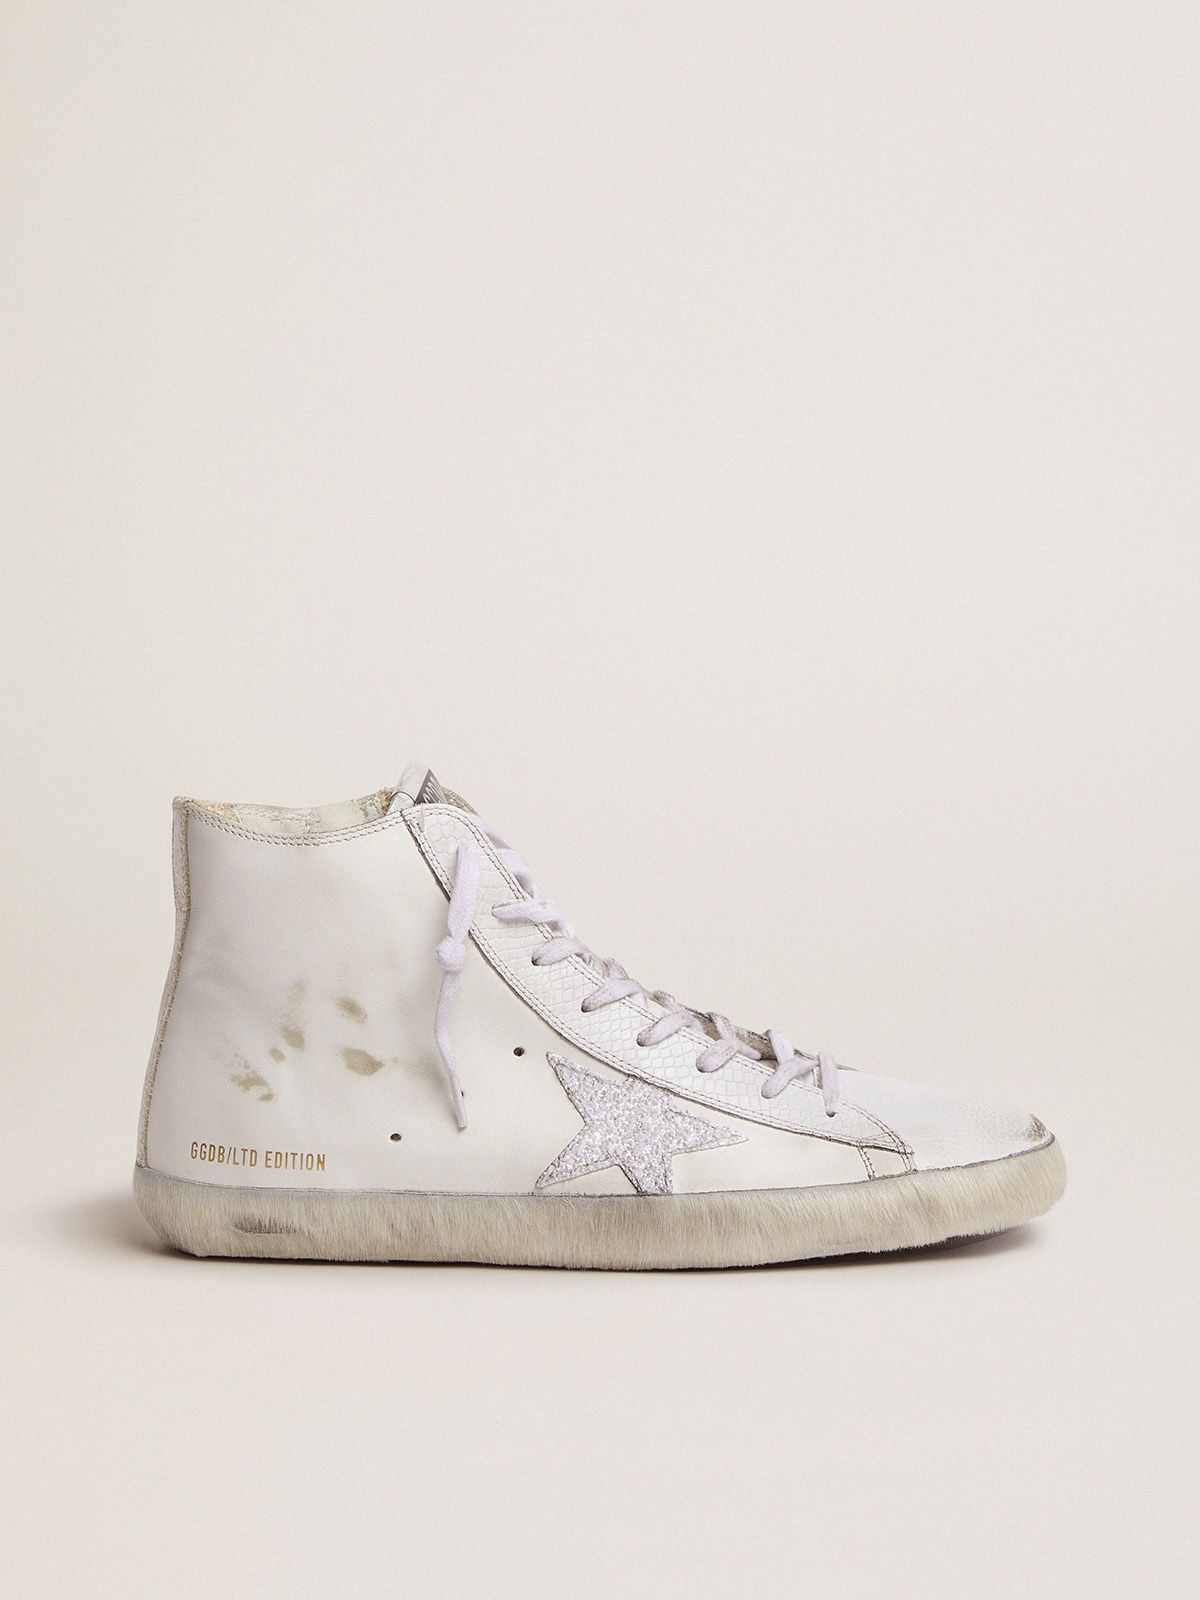 golden goose Limited sneakers and Men’s LAB white Francy Edition glitter